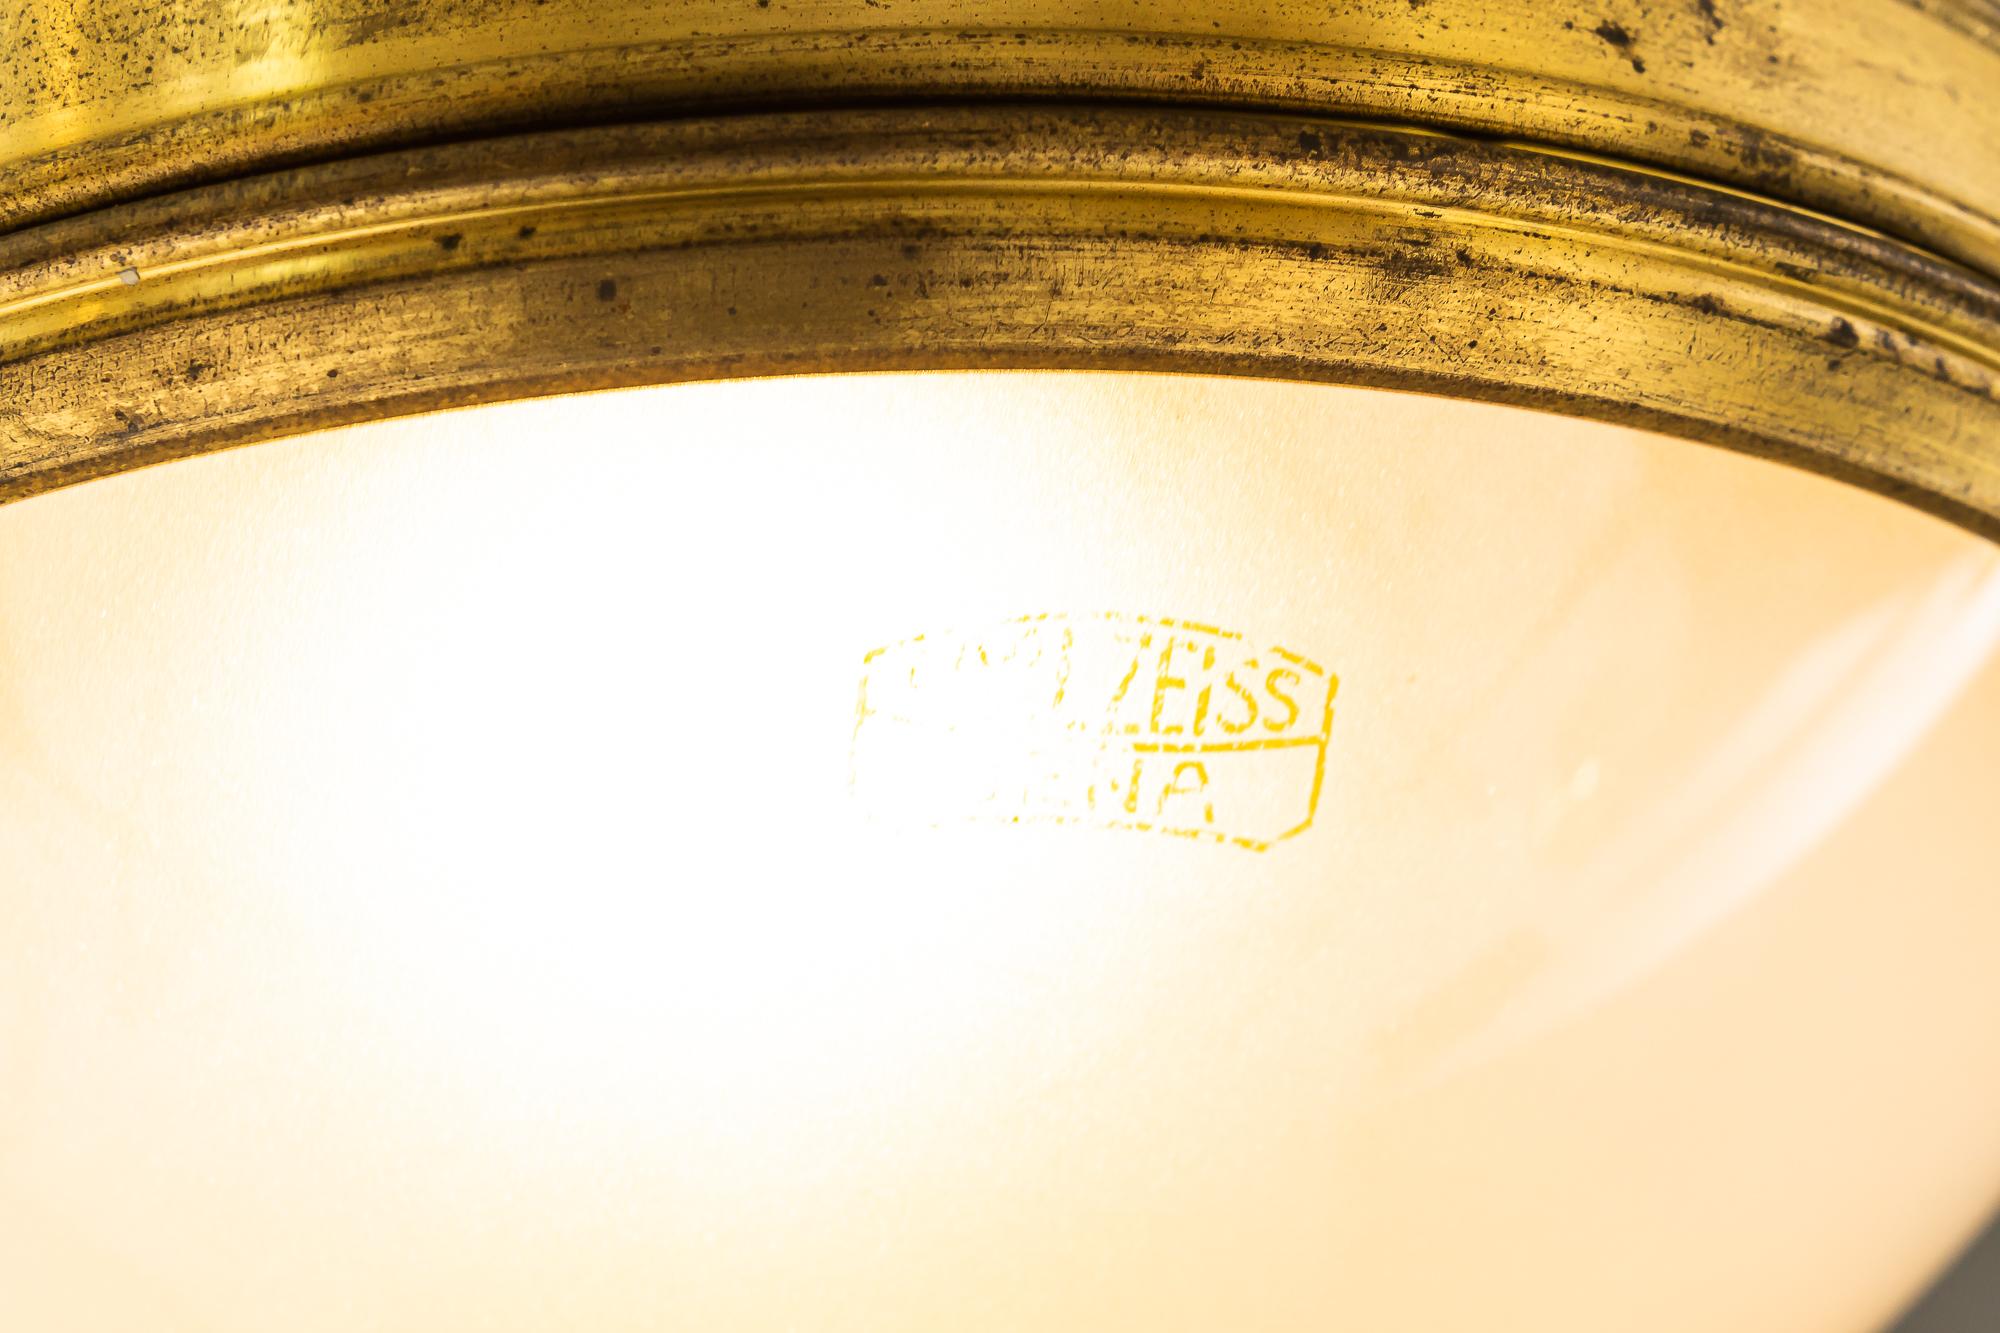 Rare Carl Zeiss Jena Ceiling Lamp with Original Glass Around 1930s 'Marked' 10